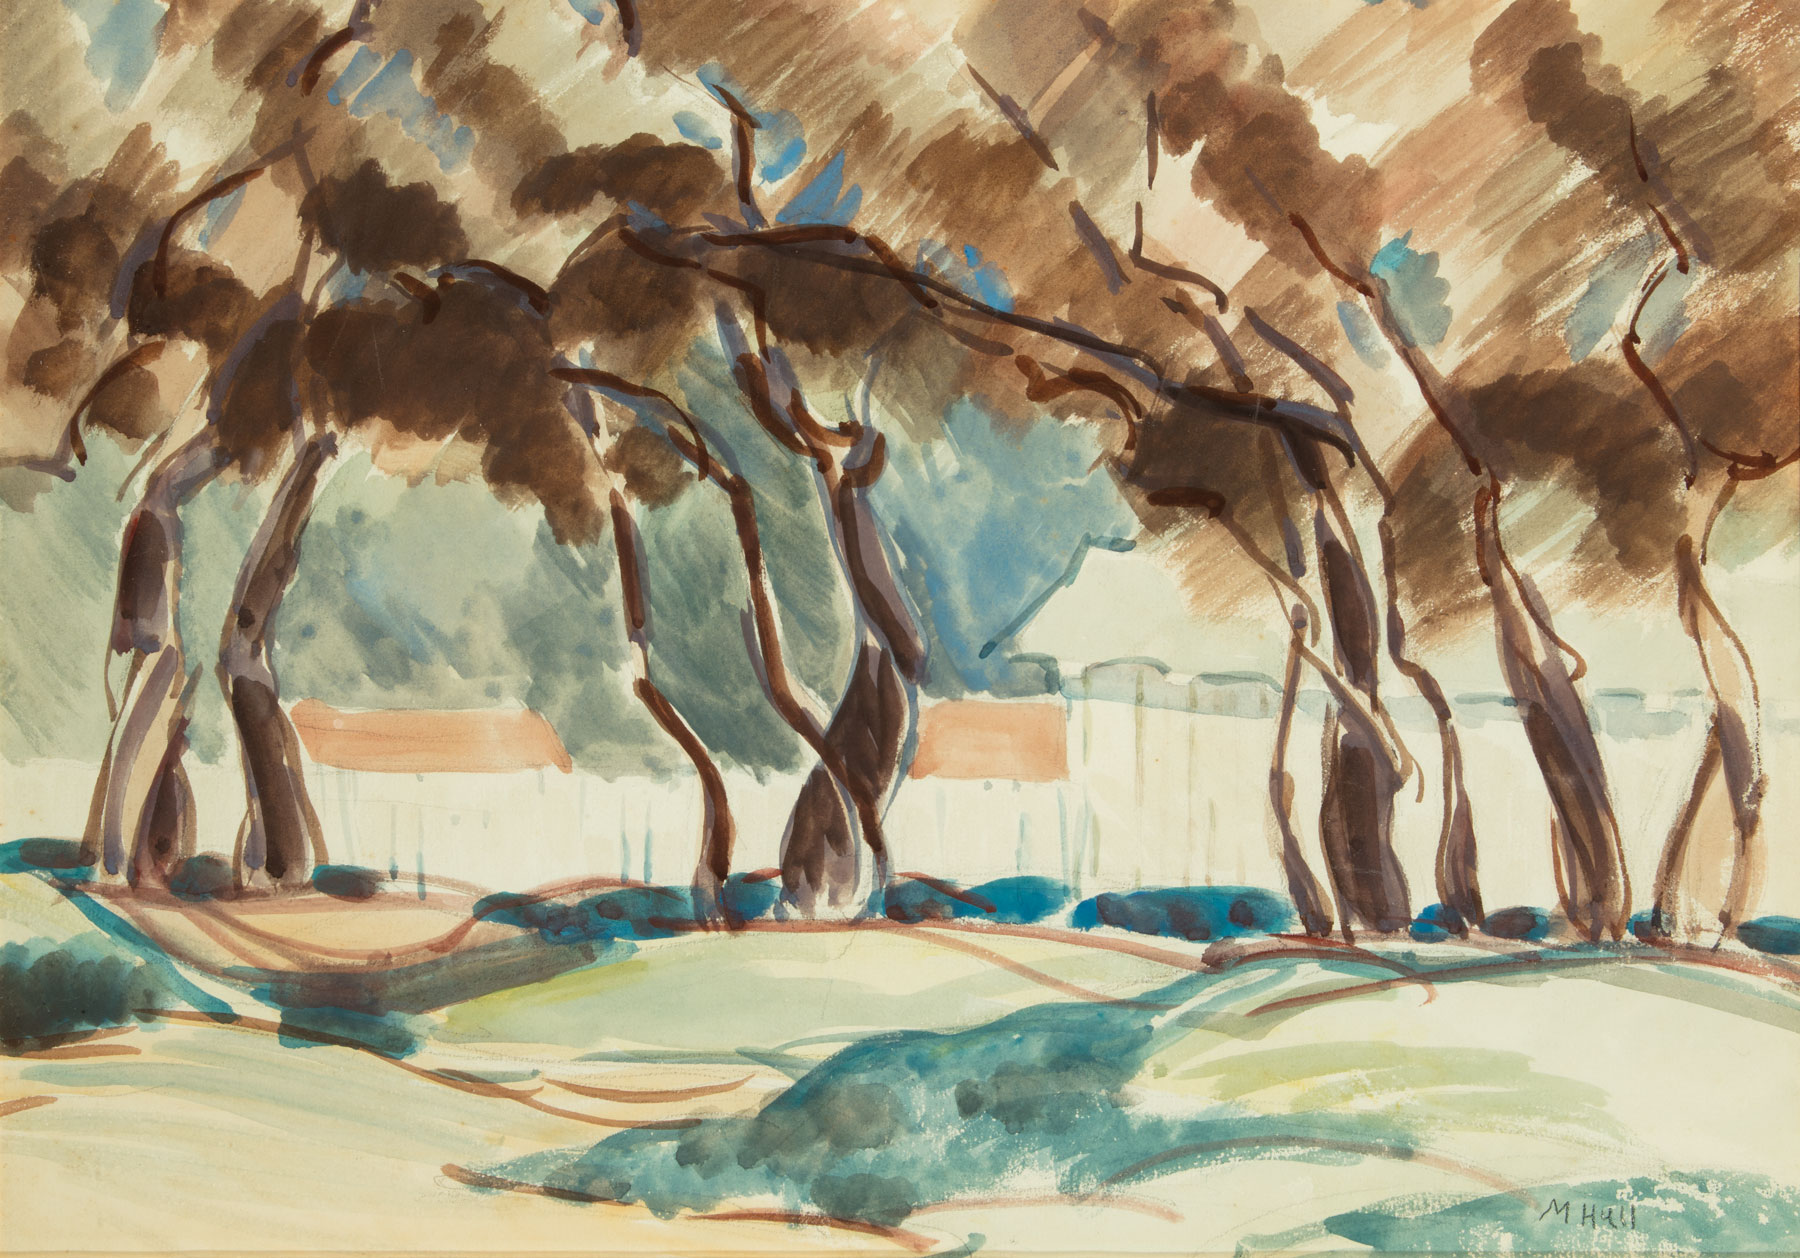 Marie Atkinson Hull (American/Mississippi, 1890-1980), "Trees", watercolor on paper, pencil-signed - Image 2 of 3